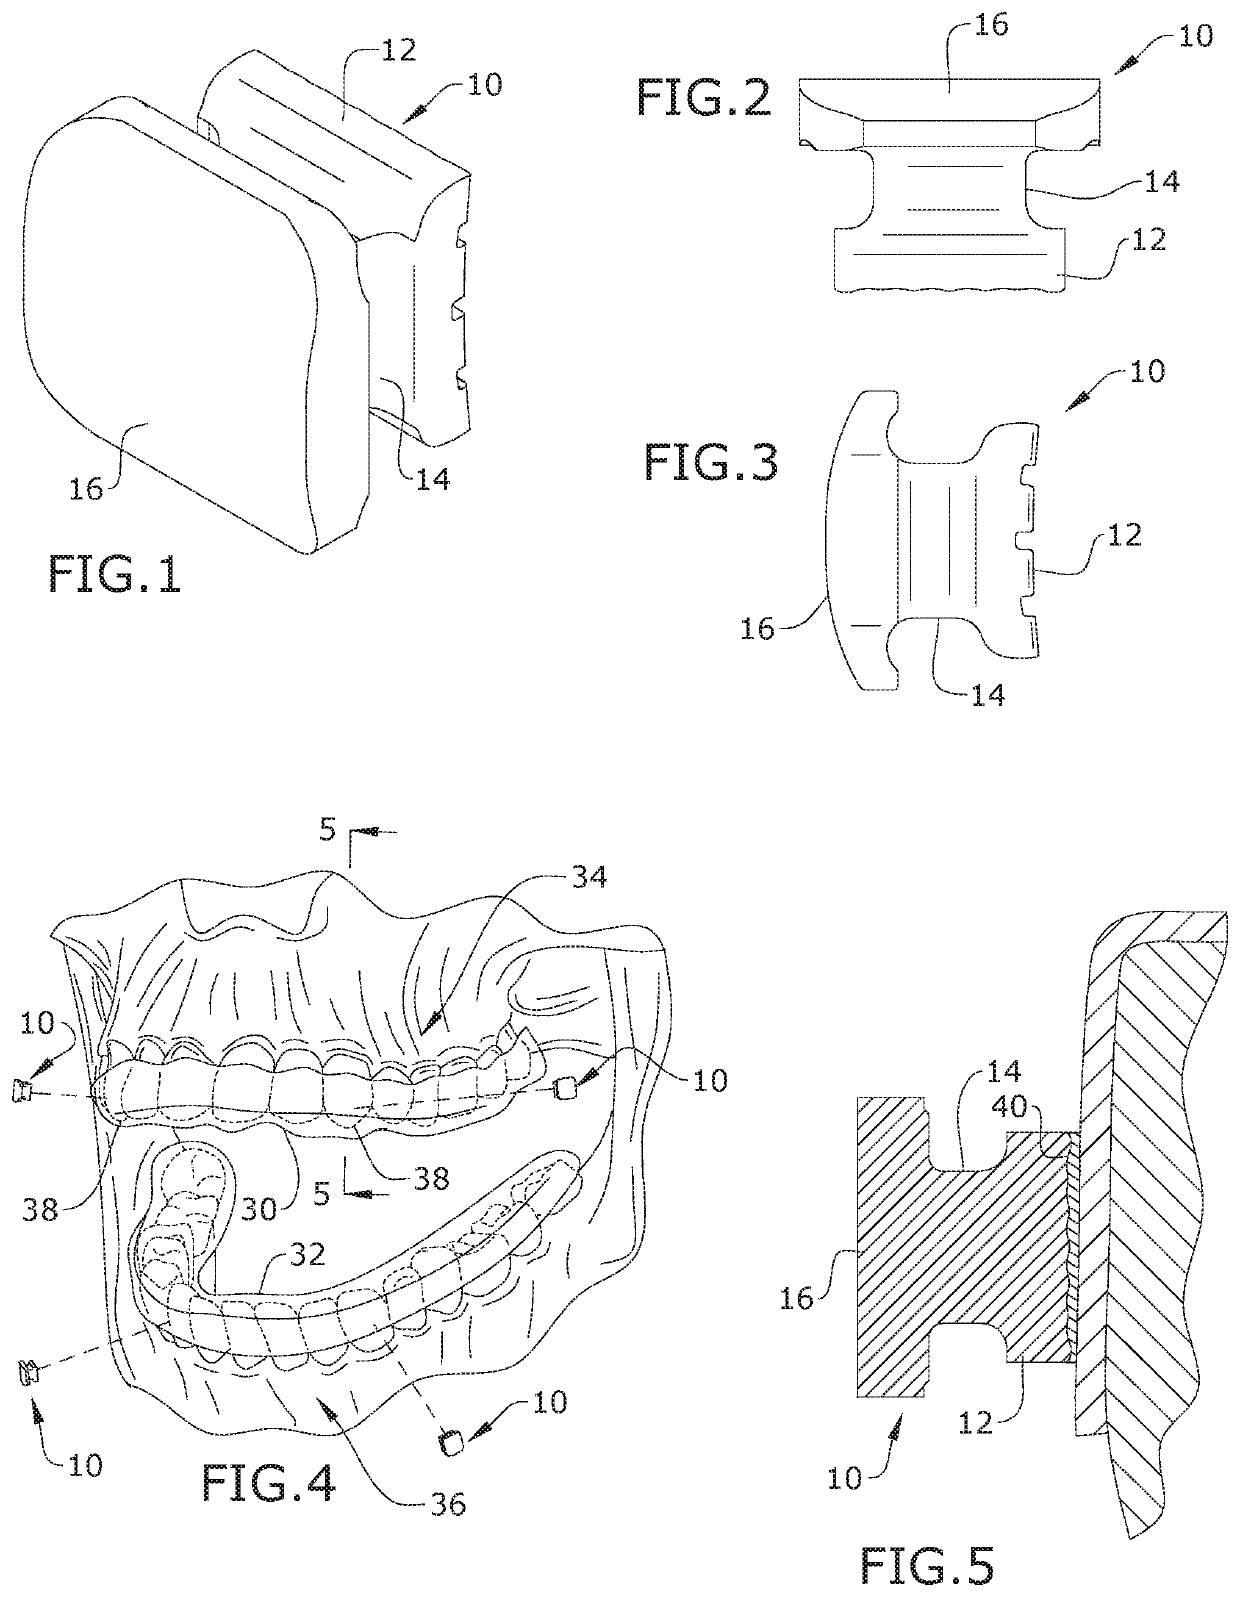 Apparatus and methods to convert dental, oral, orthodontic appliances, retainers, and dentures into a multifunctional oral appliance